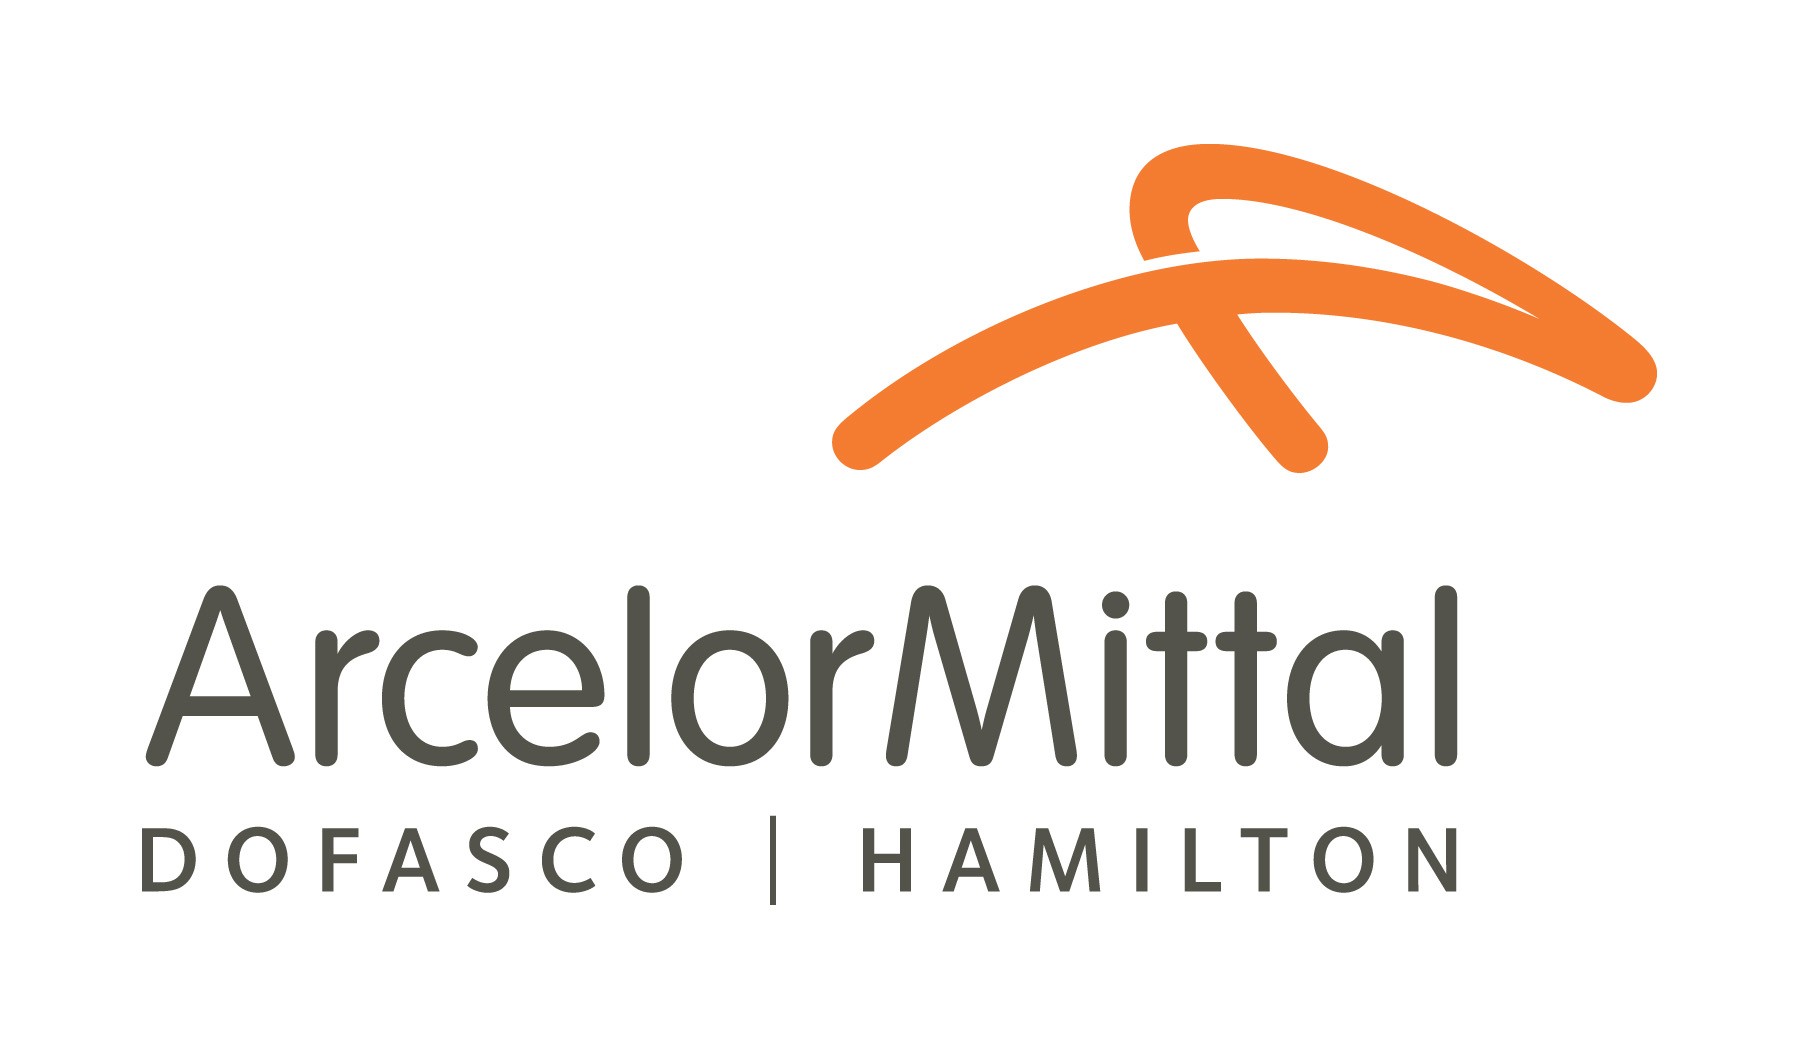 SMS group to replace the largest converter in North America at ArcelorMittal Dofasco, employing latest technological features